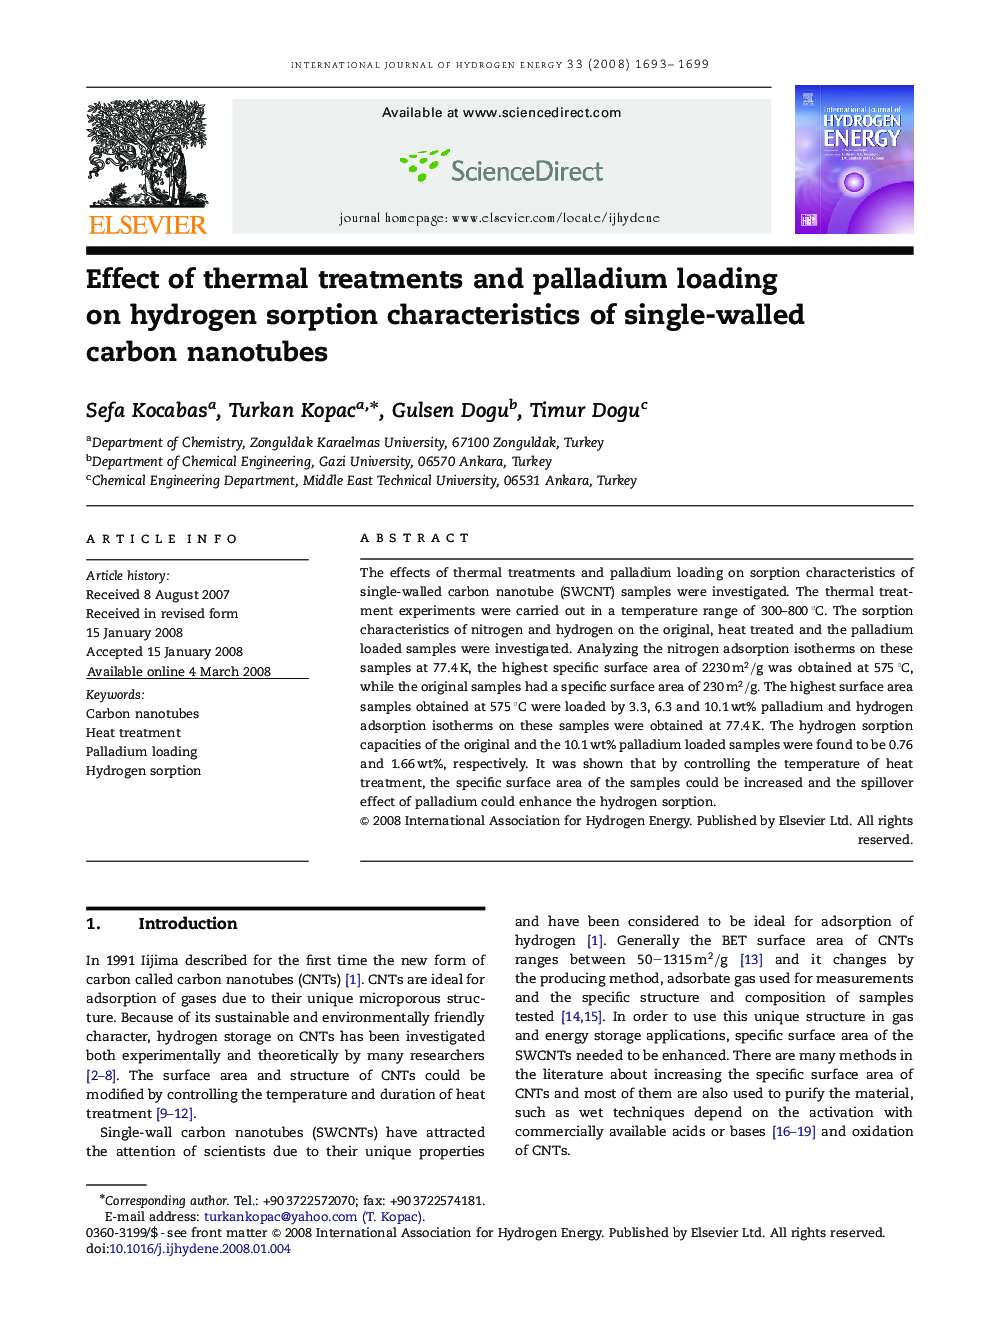 Effect of thermal treatments and palladium loading on hydrogen sorption characteristics of single-walled carbon nanotubes